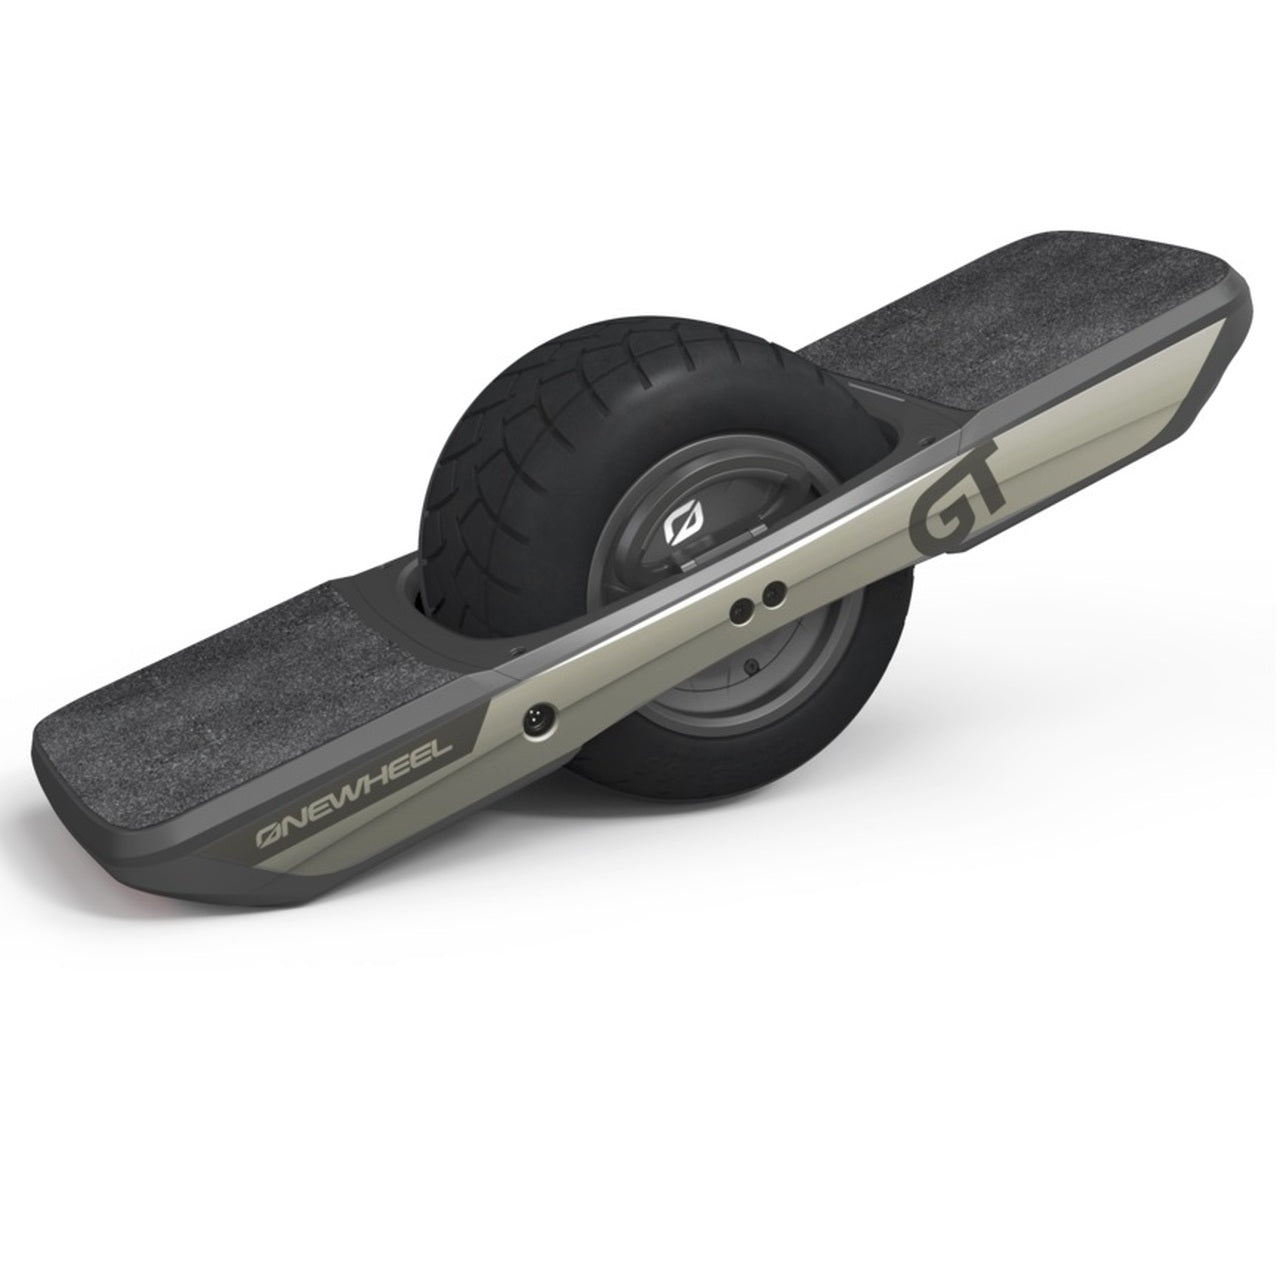 Onewheel GT - Treaded Tire (BUNDLES AVAILABLE)